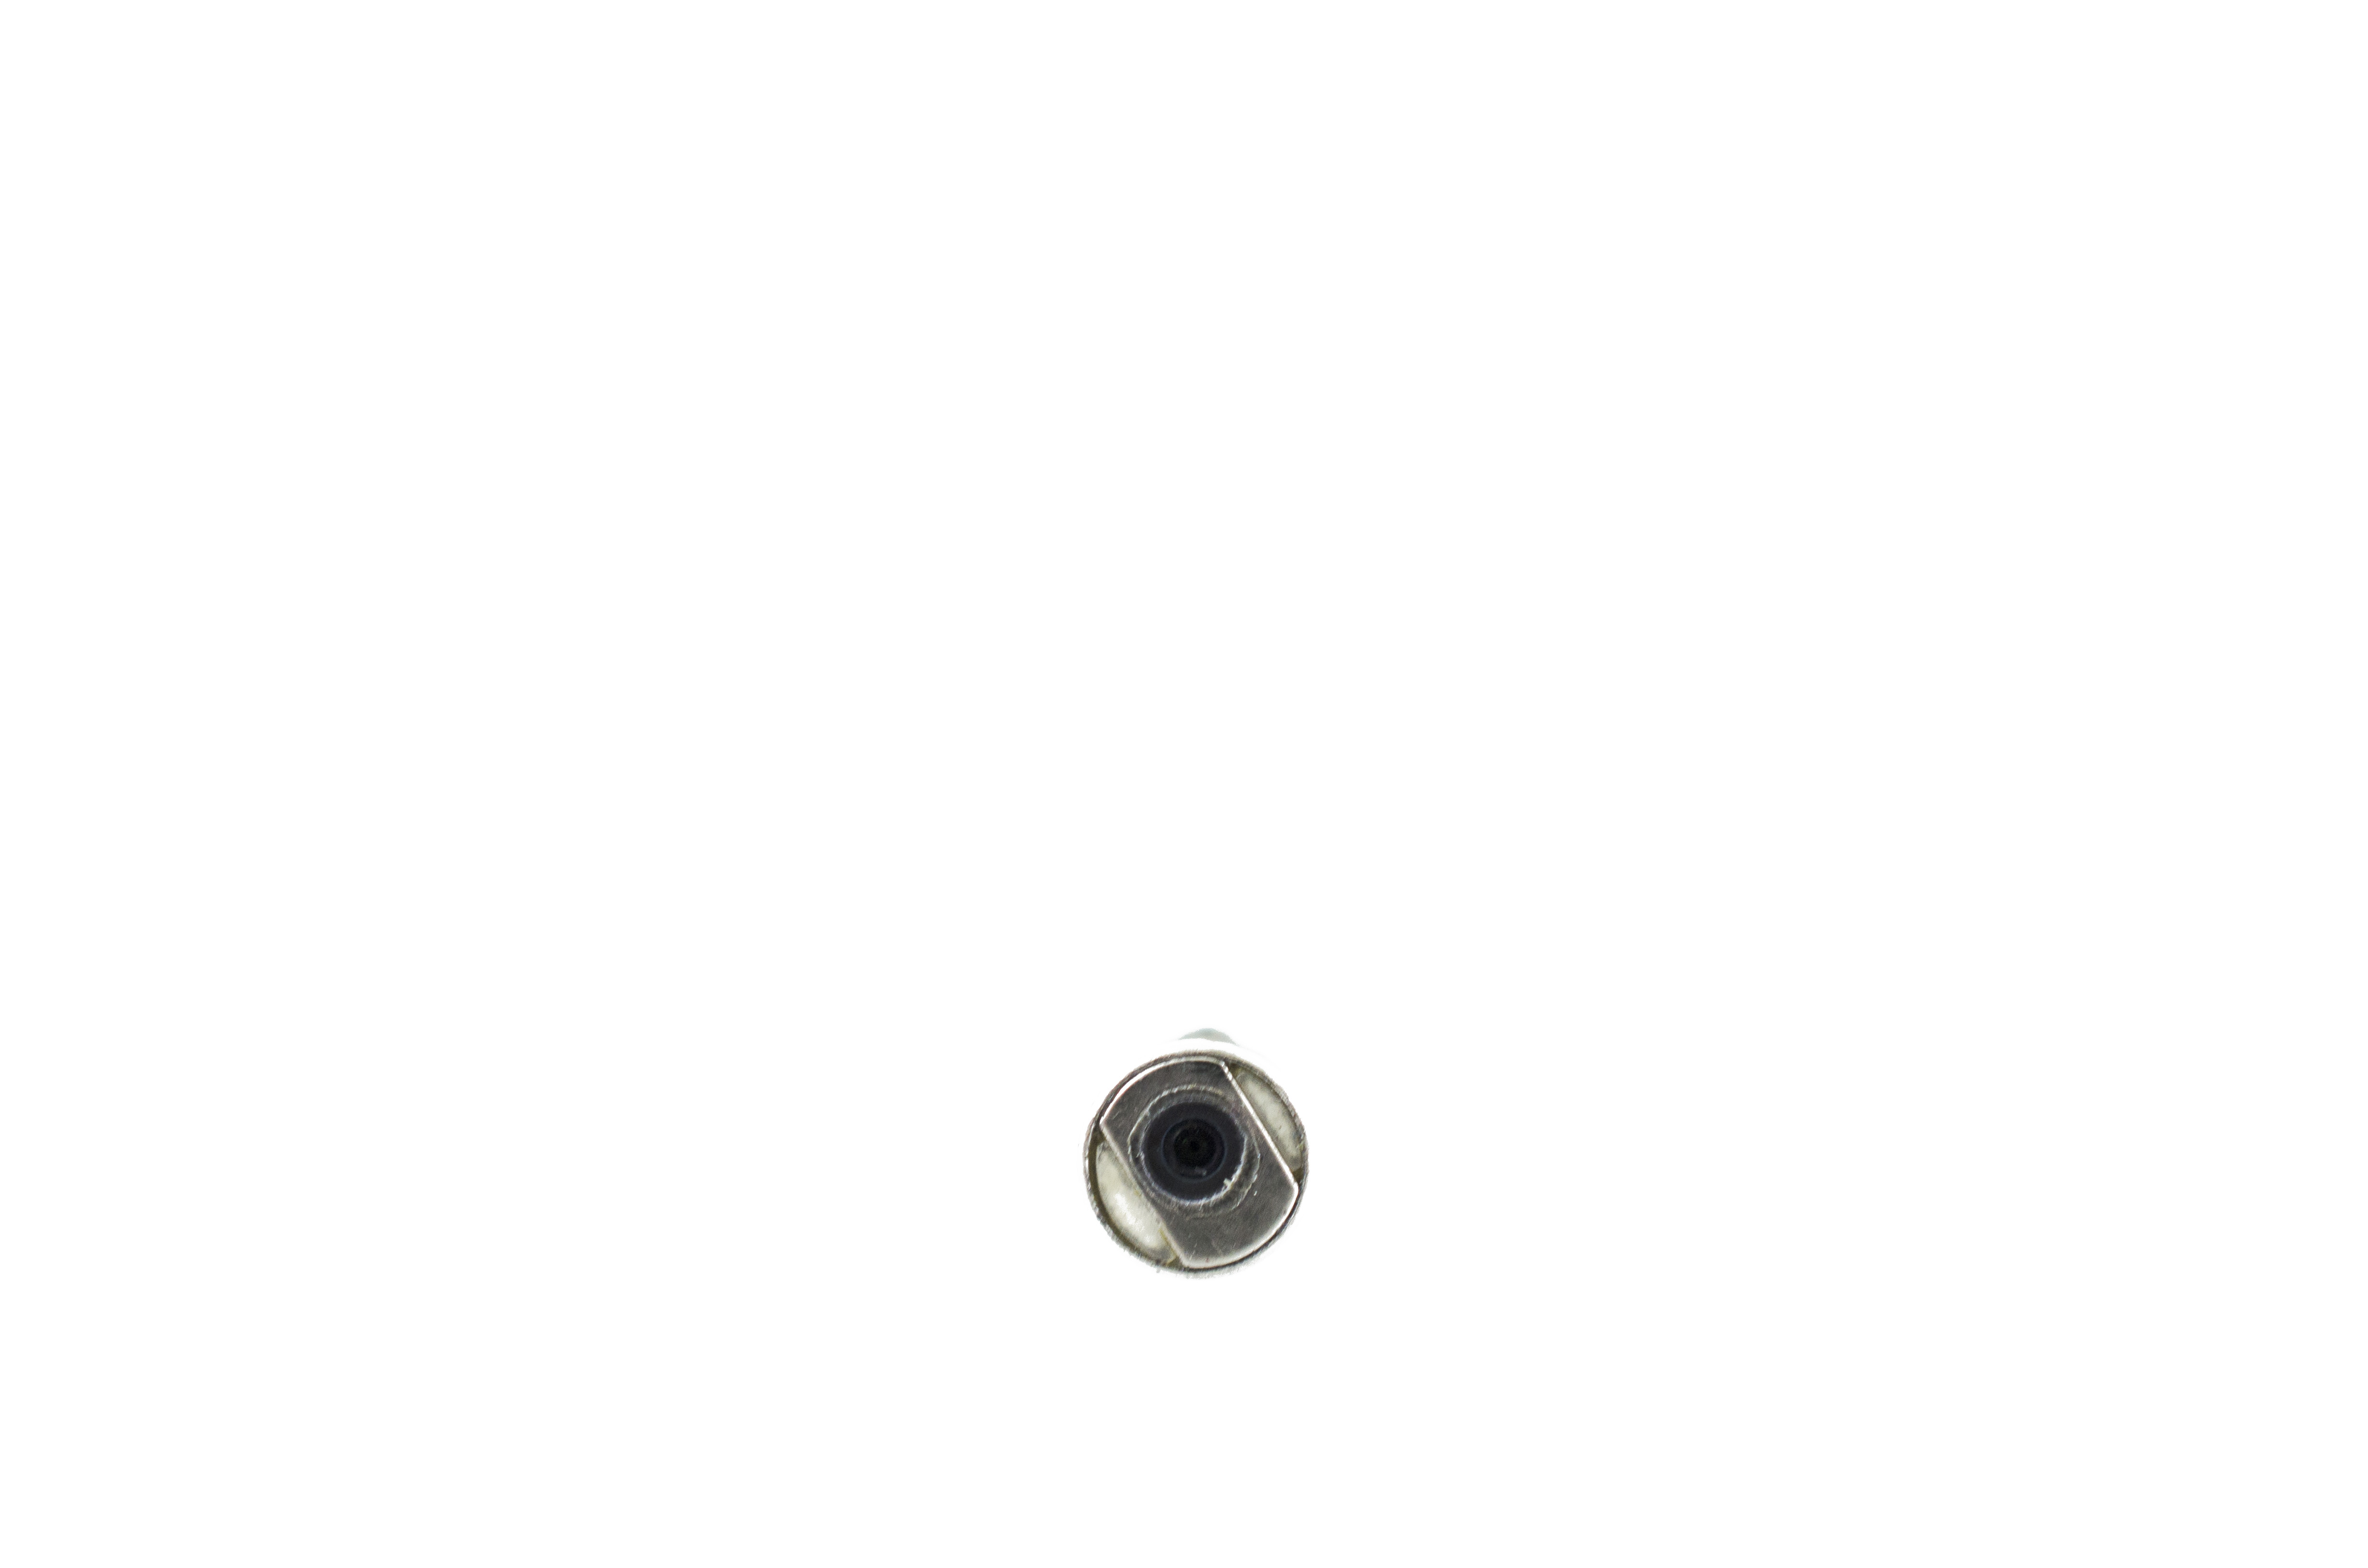 OEM Distal Tip with Lenses and C-Cover - ENF-V